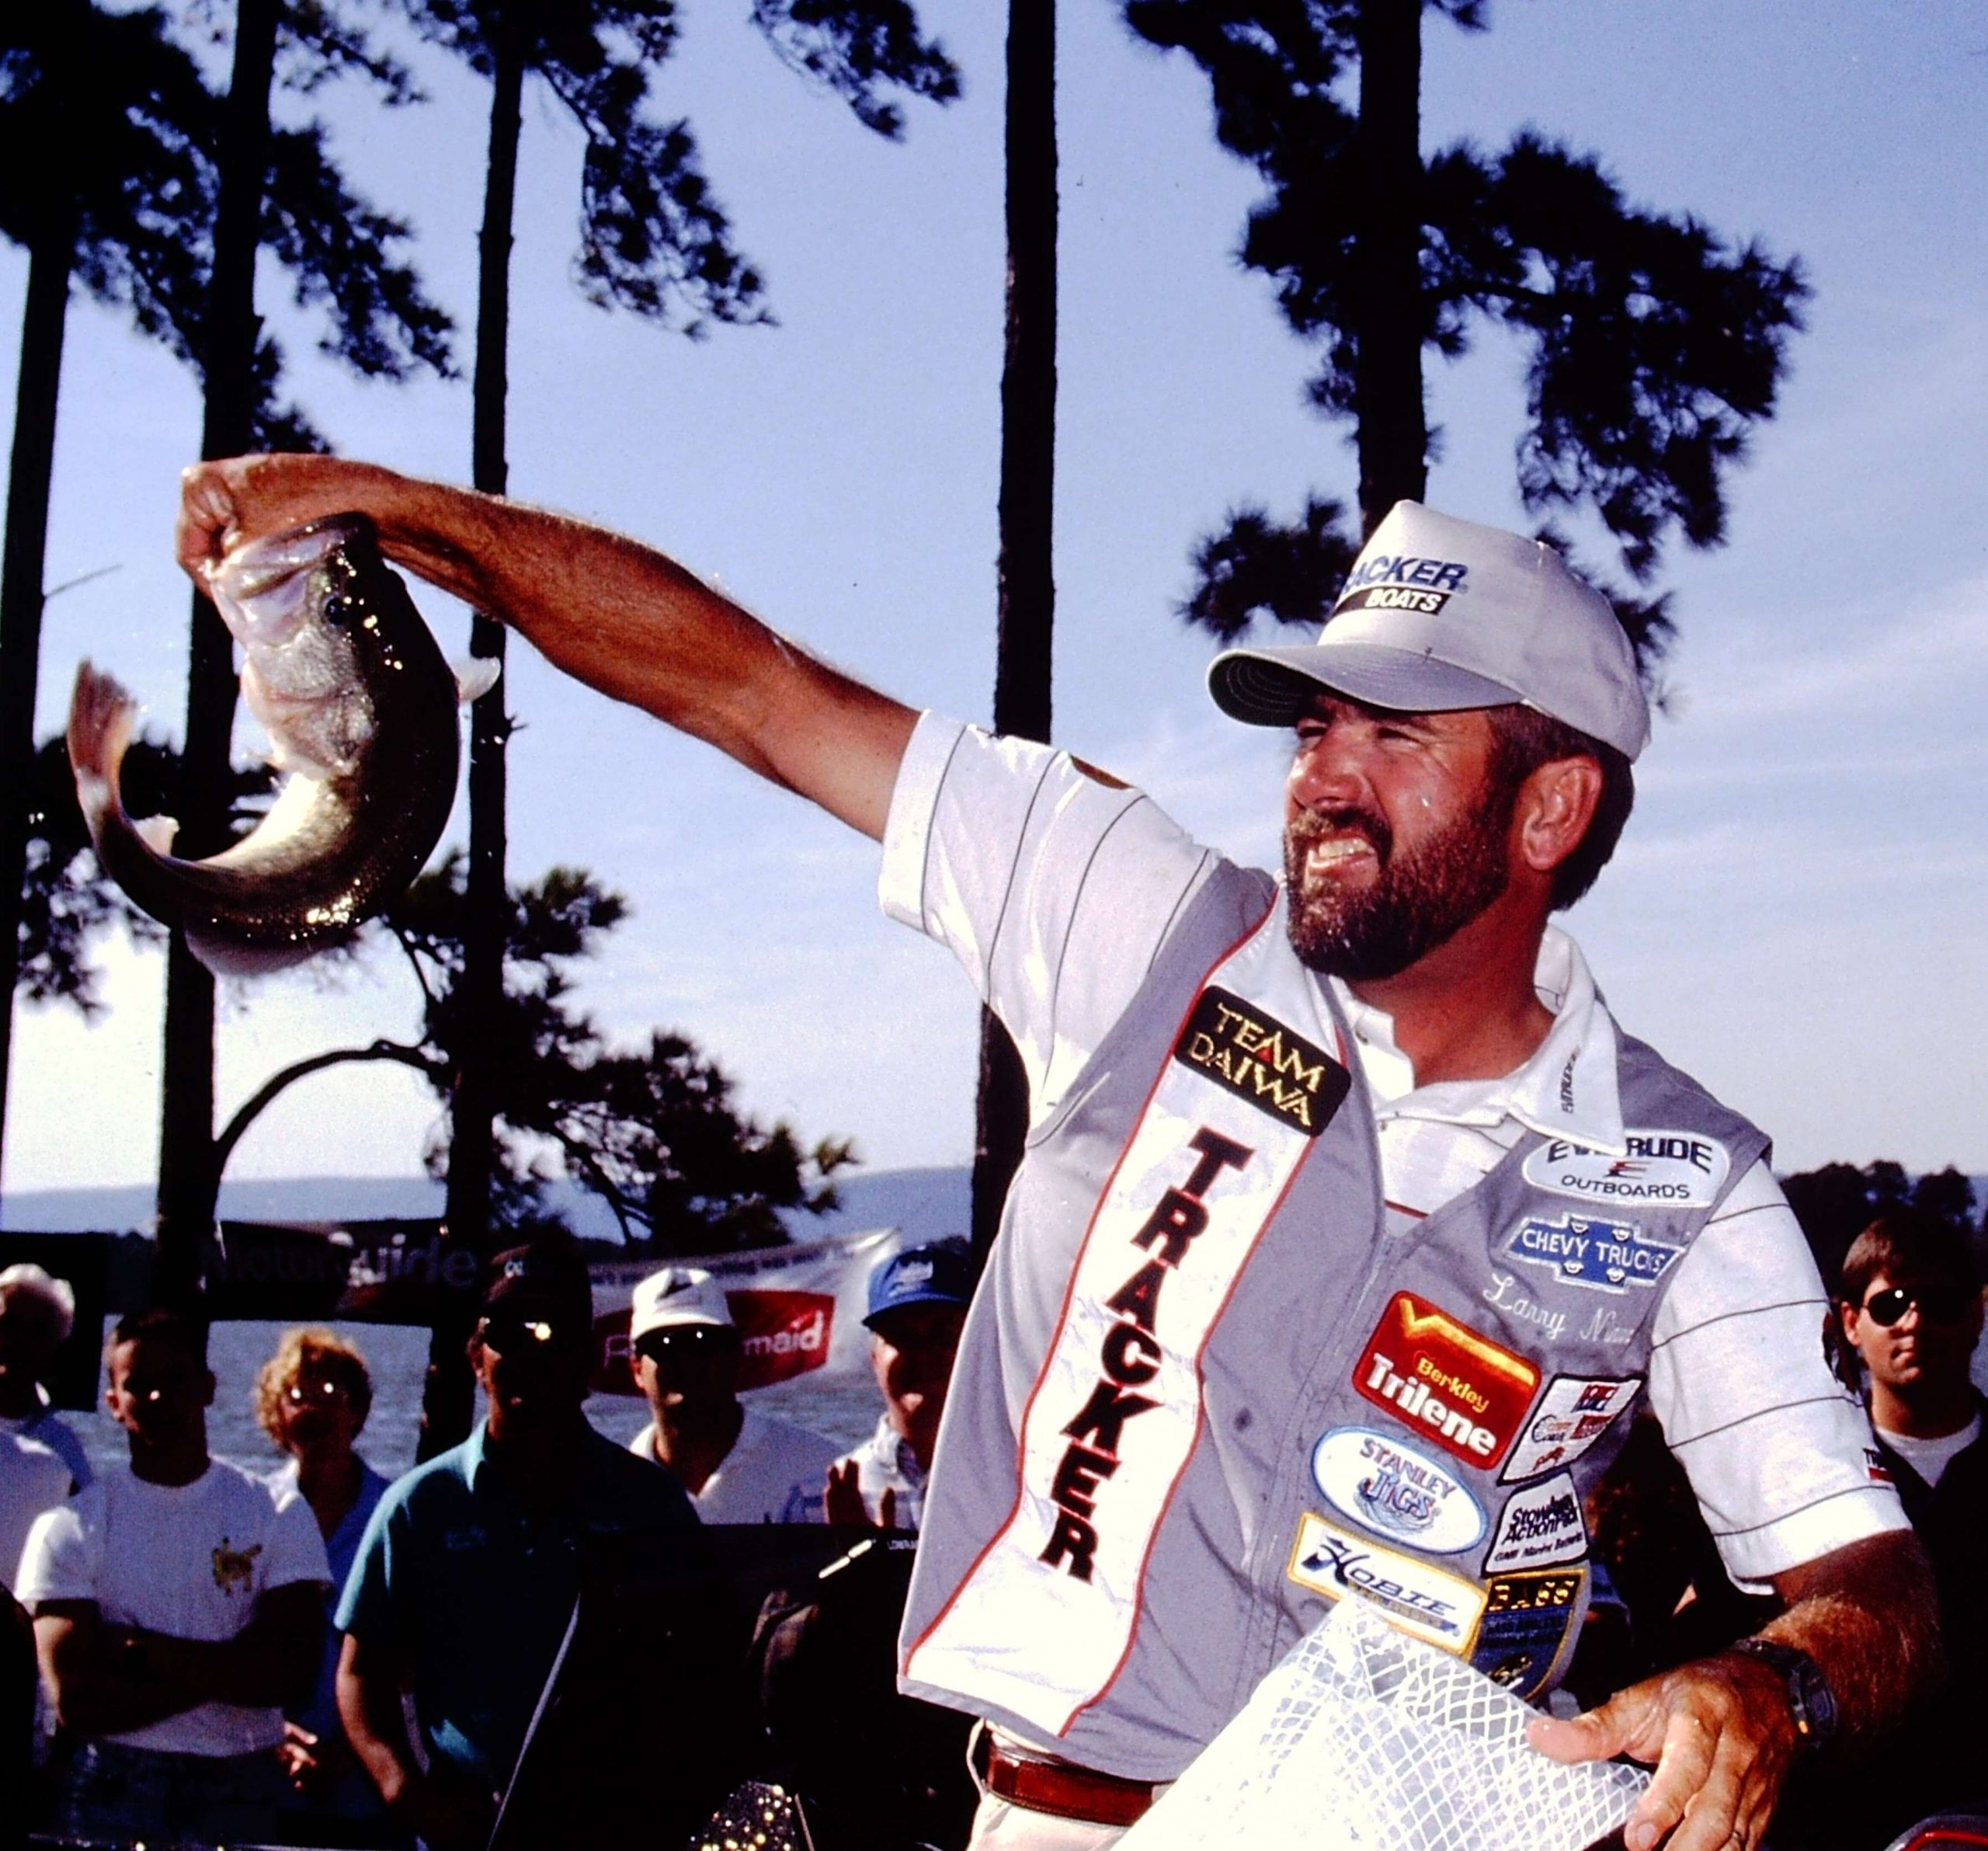 Just more than a year later, B.A.S.S. made its most recent trip to Chickamauga, Oct. 7-12, 1991, for the Bassmaster MegaBucks Tournament. The six-day tournament included a cut to 10 and a weight-zero. Larry Nixon won with 18-2 on those final two days of fishing. It was his third MegaBucks title in a row. B.A.S.S. only hosted seven MegaBucks tournaments, and Nixon won four of them. At Chickamauga, Nixon fished a Bomber 6A crankbait on rocks with deep water coming in with some shad around. In isolated brushpiles, he slow rolled a 3/8-ounce Stanley Vibra-Shaft or a 1/8-ounce Bomber Mini-Whicker spinnerbait.